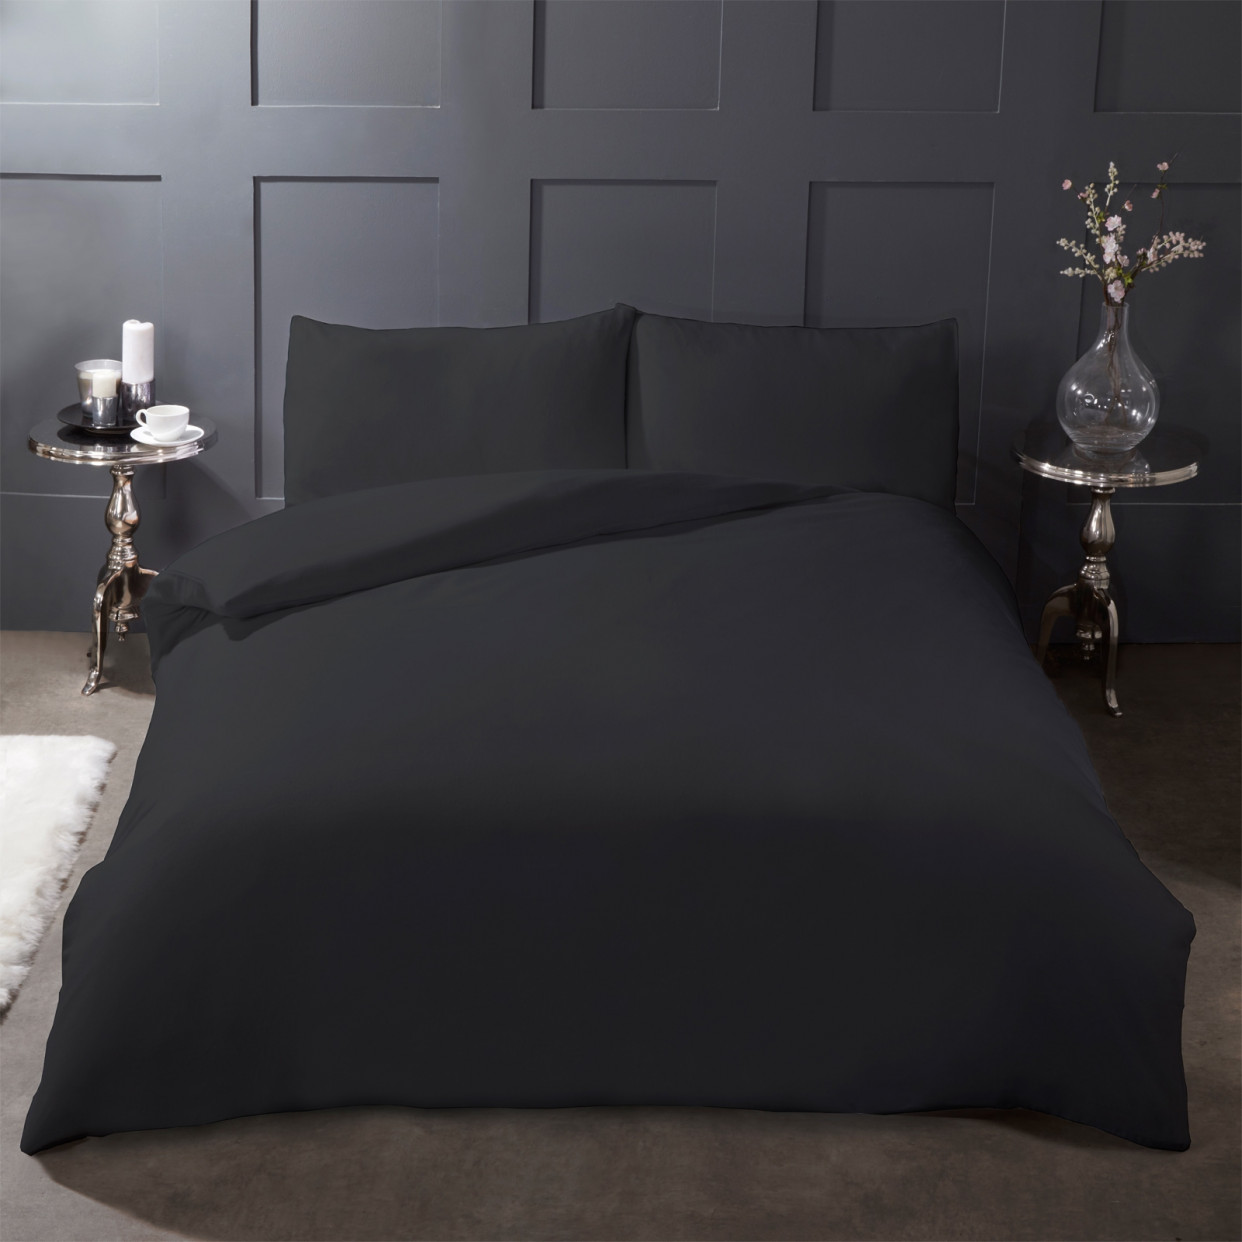 Highams 100% Brushed Cotton Duvet Cover with Pillowcase Flannelette Thermal Bedding Set, Plain Charcoal Black - Double>